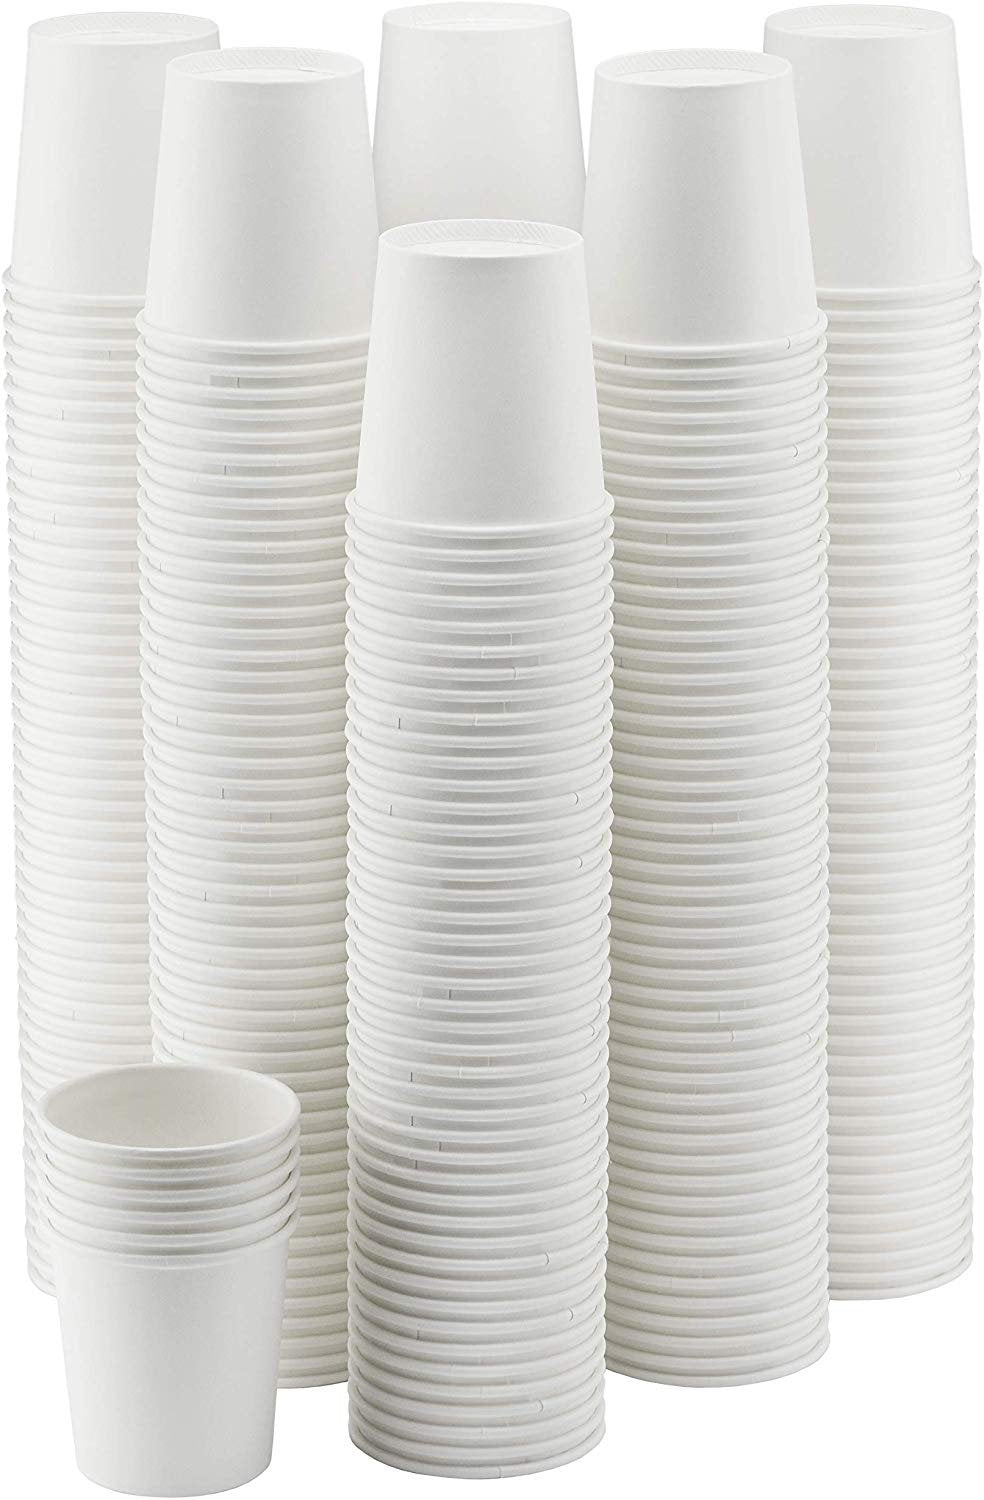 NYHI 300-Pack 4 oz. White Paper Disposable Cups – Hot/Cold Beverage Drinking Cup for Water, Juice, Coffee or Tea – Ideal for Water Coolers, Party, or Coffee On the Go’ - NY-HI